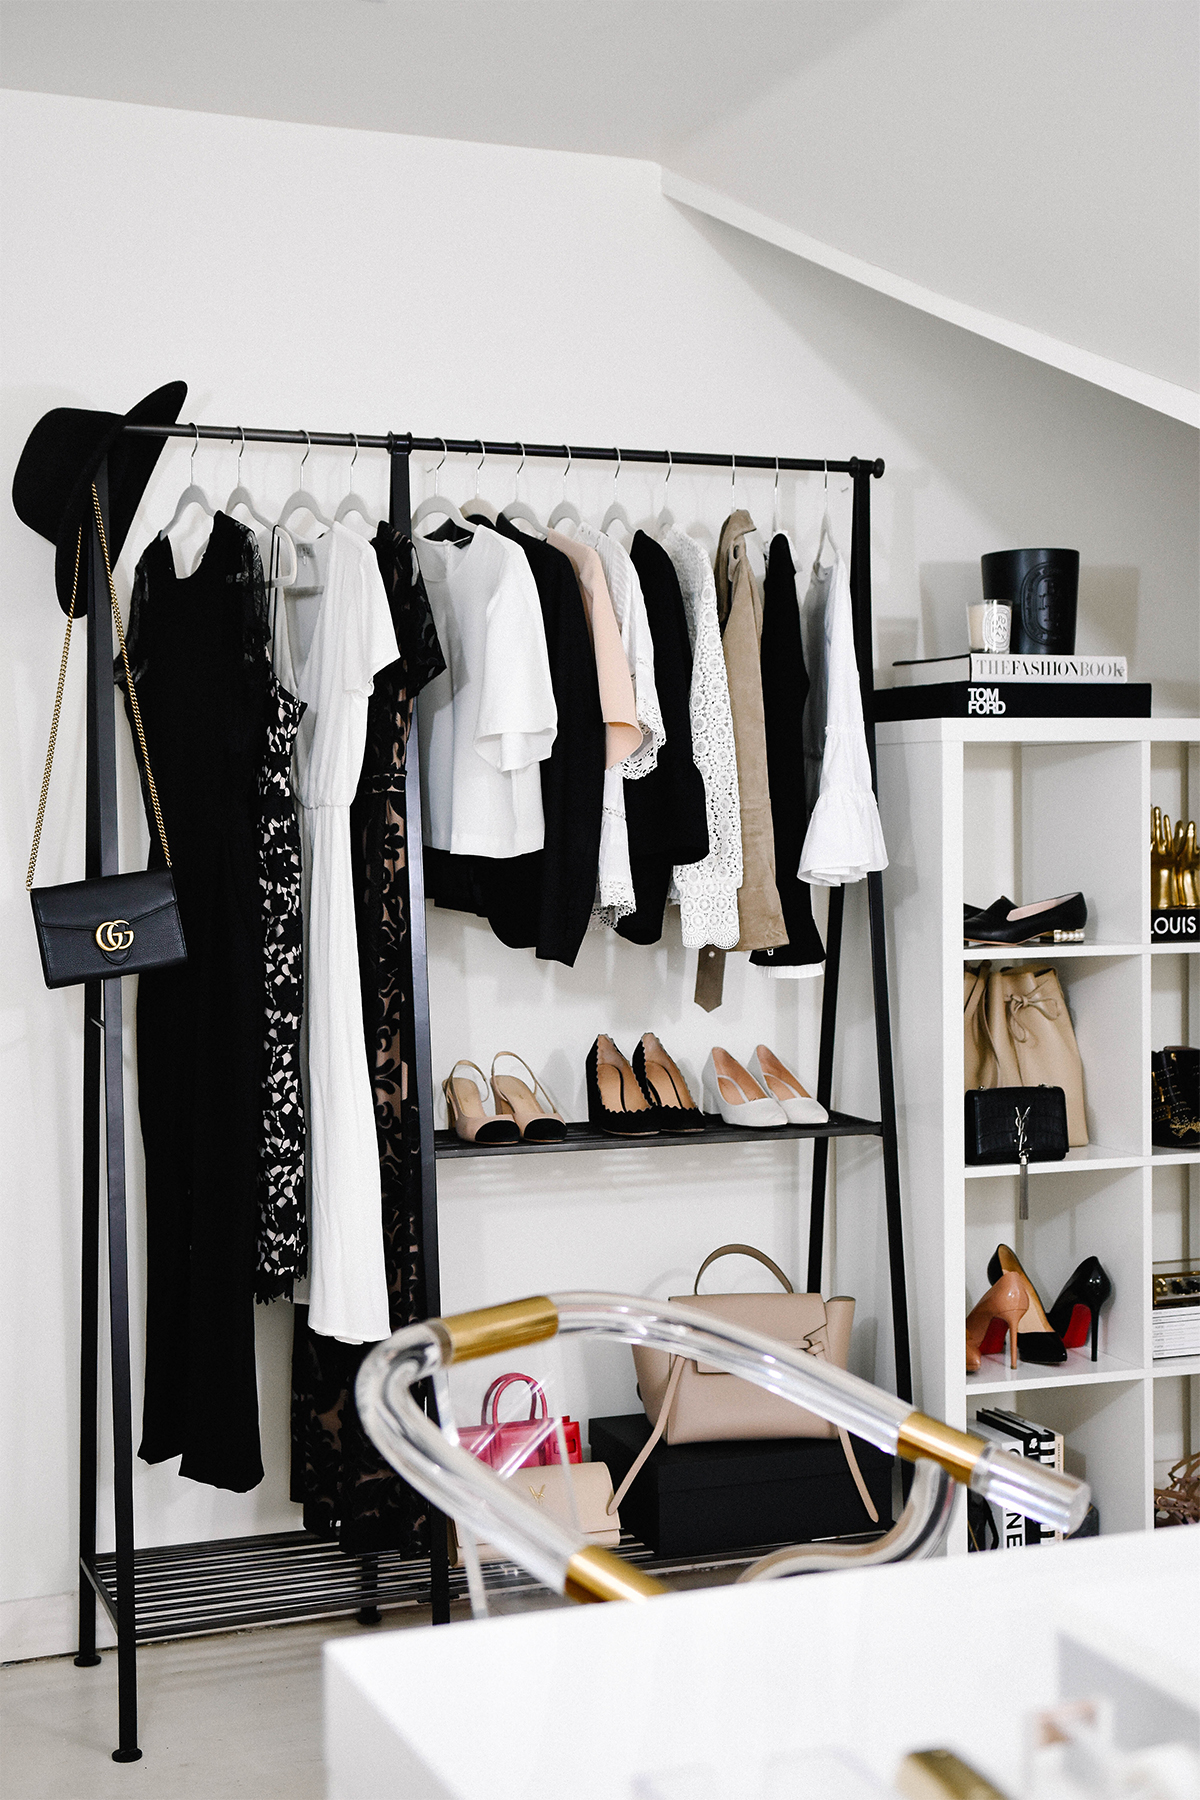 Fashion Jackson, Dallas Blogger, Home Office, Clothing Rack, How to Style a Clothing Rack, Ikea White Lacquer Shelves